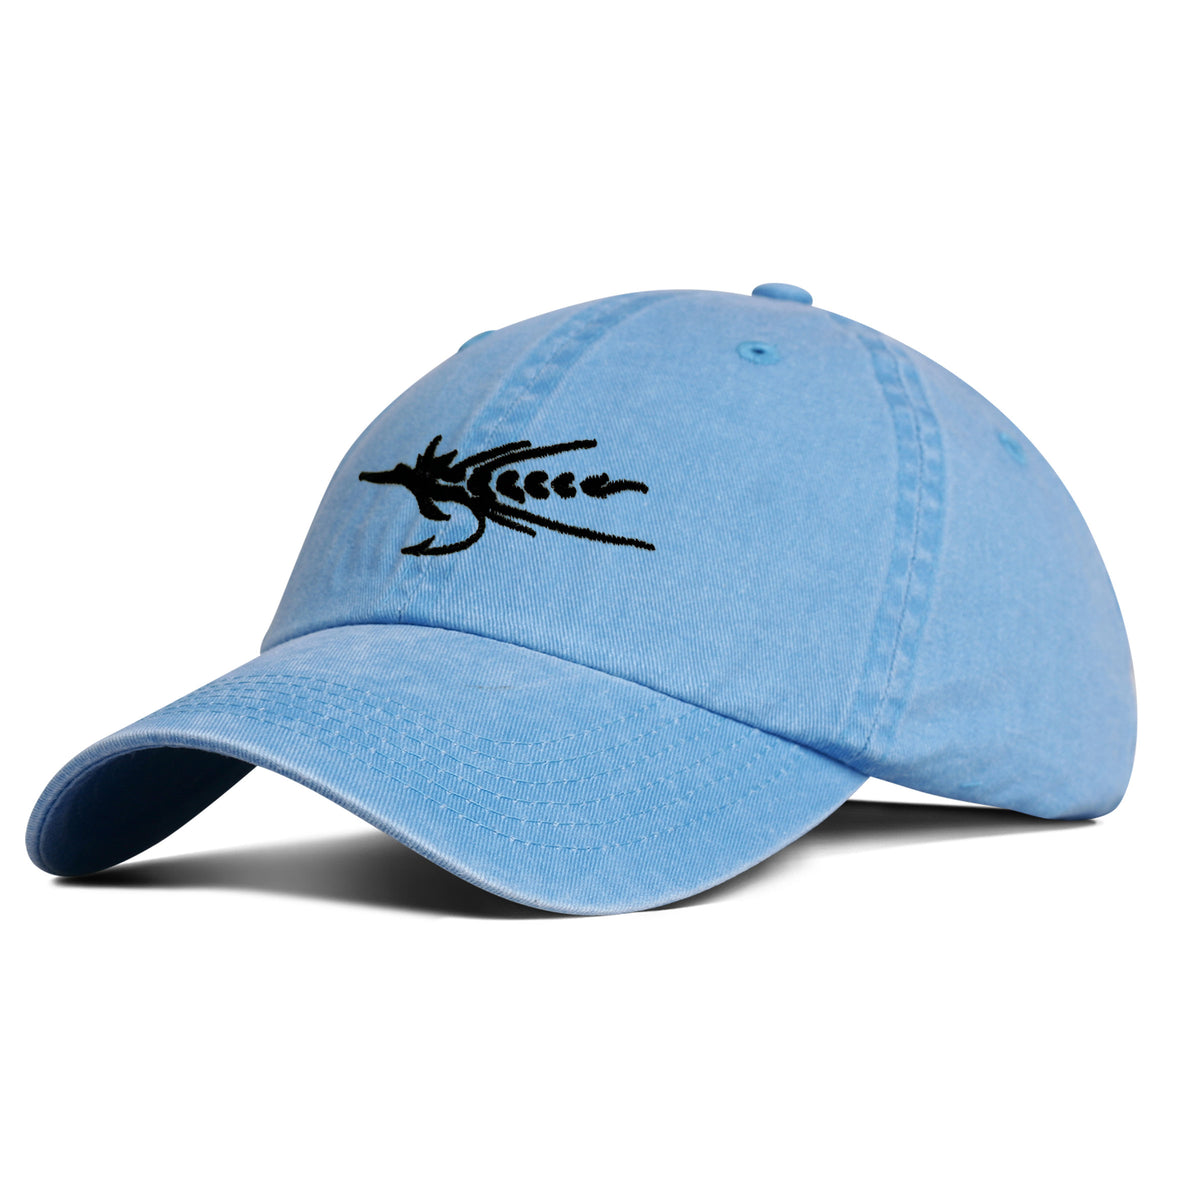 Black Fly Embroidered Hat Turquoise